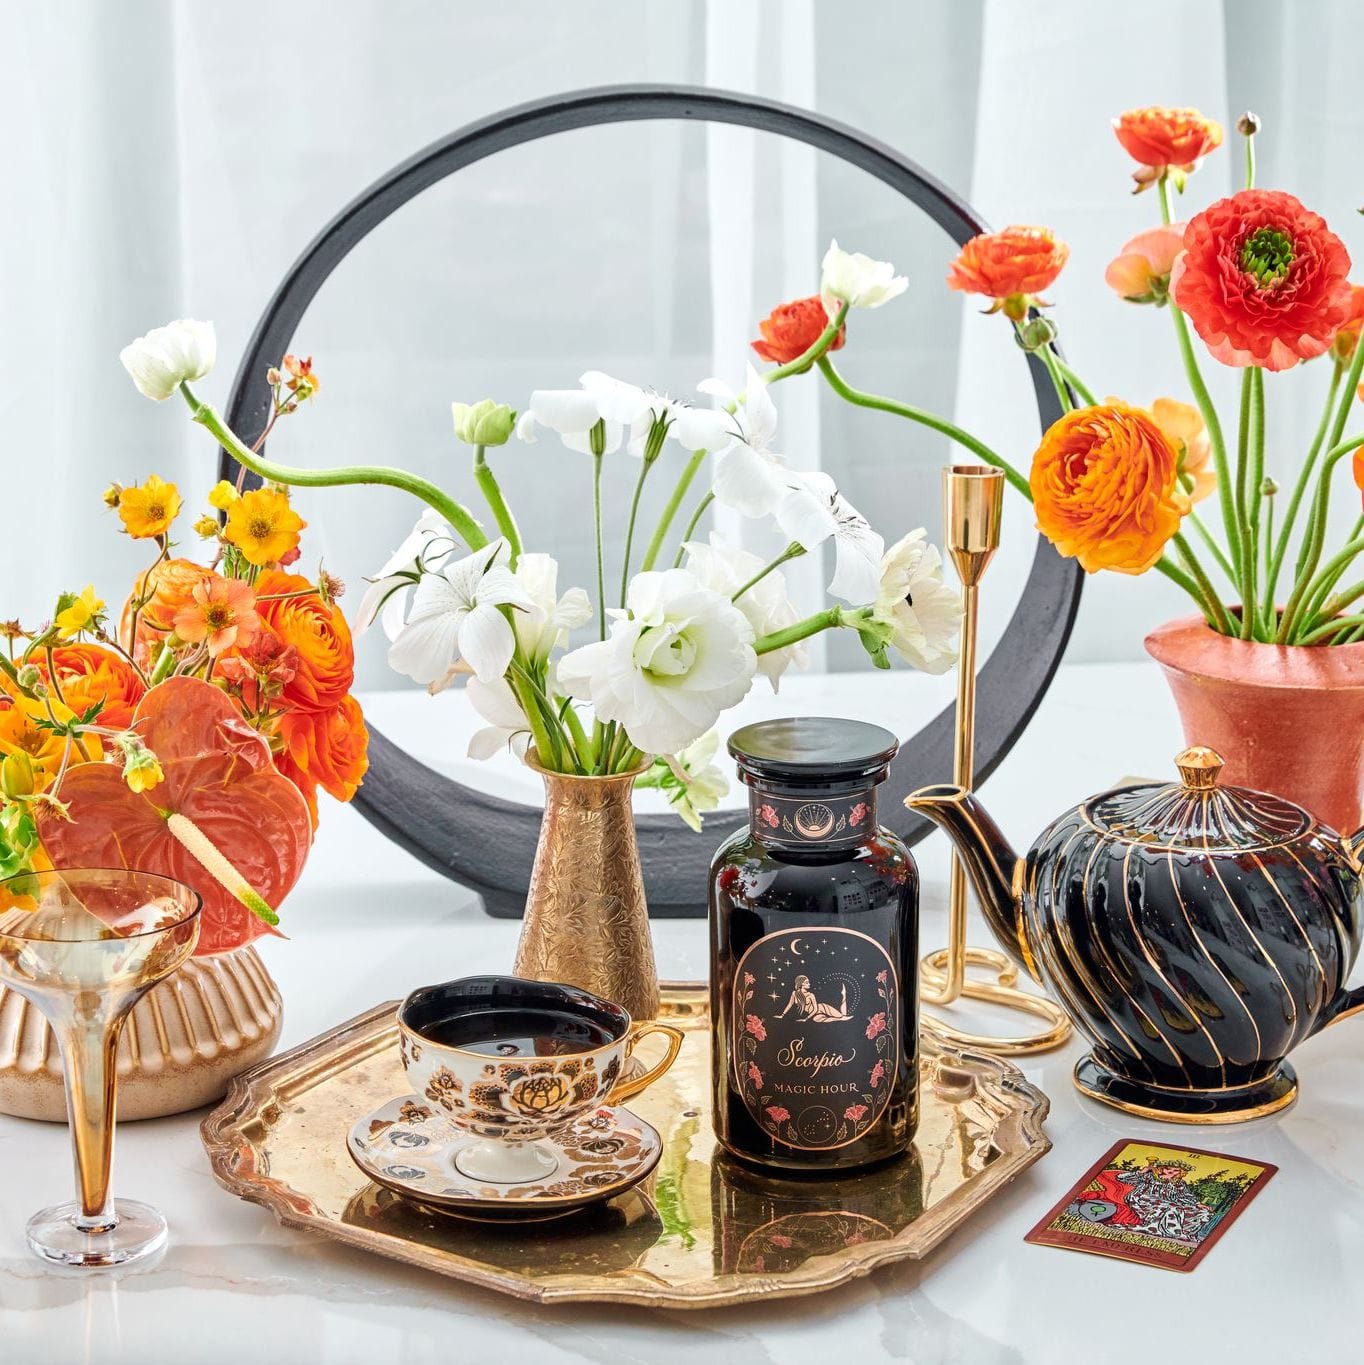 A decorative setup featuring a Magic Hour Scorpio Tea for Sensual Brilliance tin, vintage teacup and saucer, black teapot, vases with white and orange flowers, and a gold-trimmed tray. Additional items include a gold watering can, a small round mirror, and a wine glass, all set on a white surface.